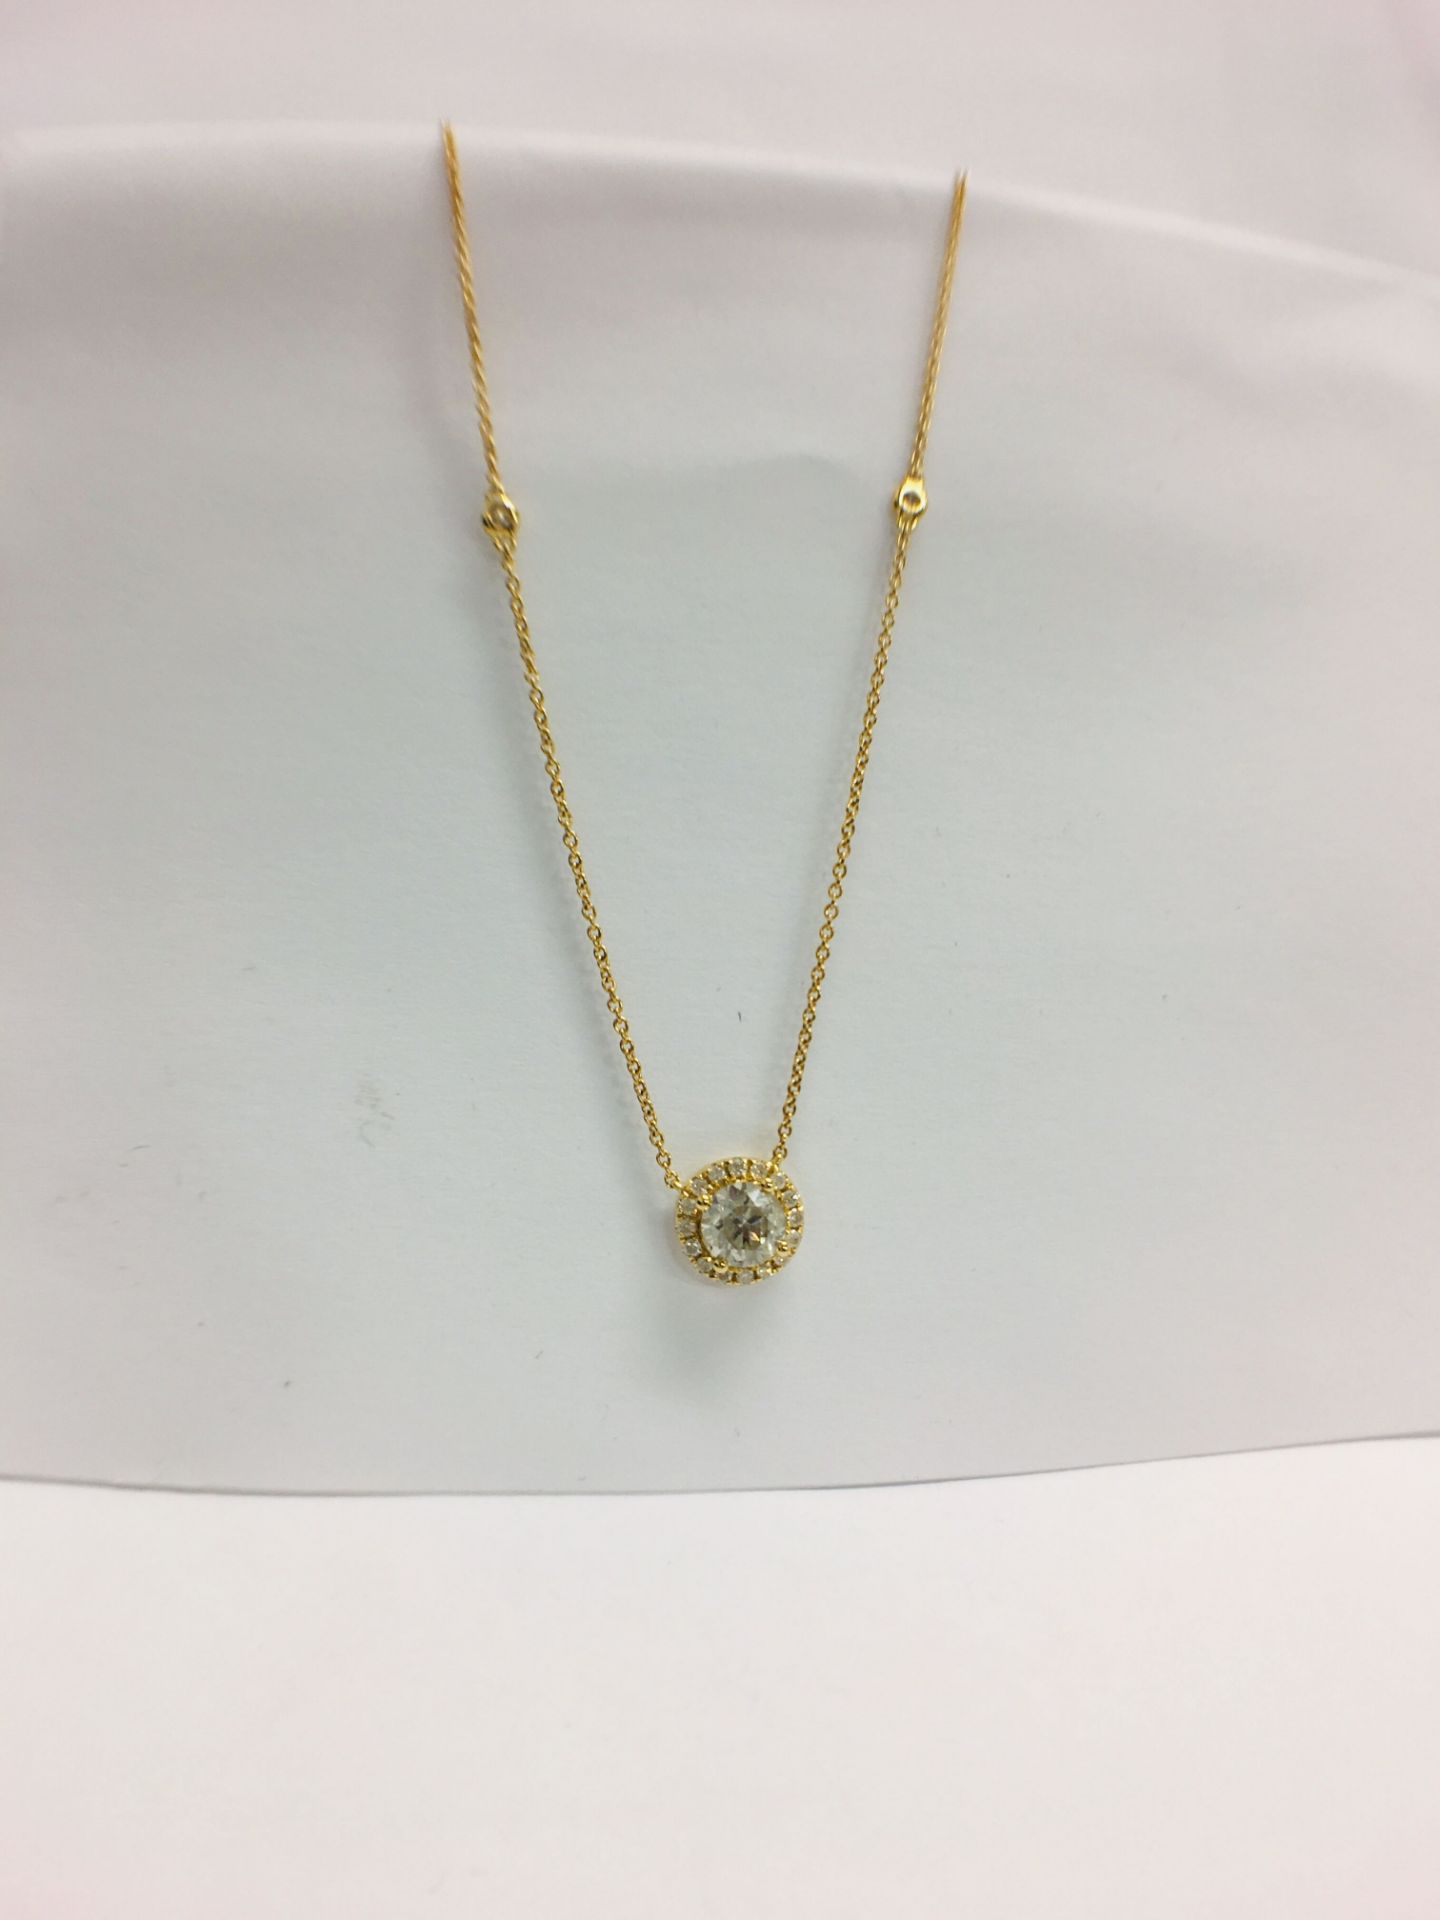 18ct Yellow Gold Diamond Necklace - Image 6 of 7